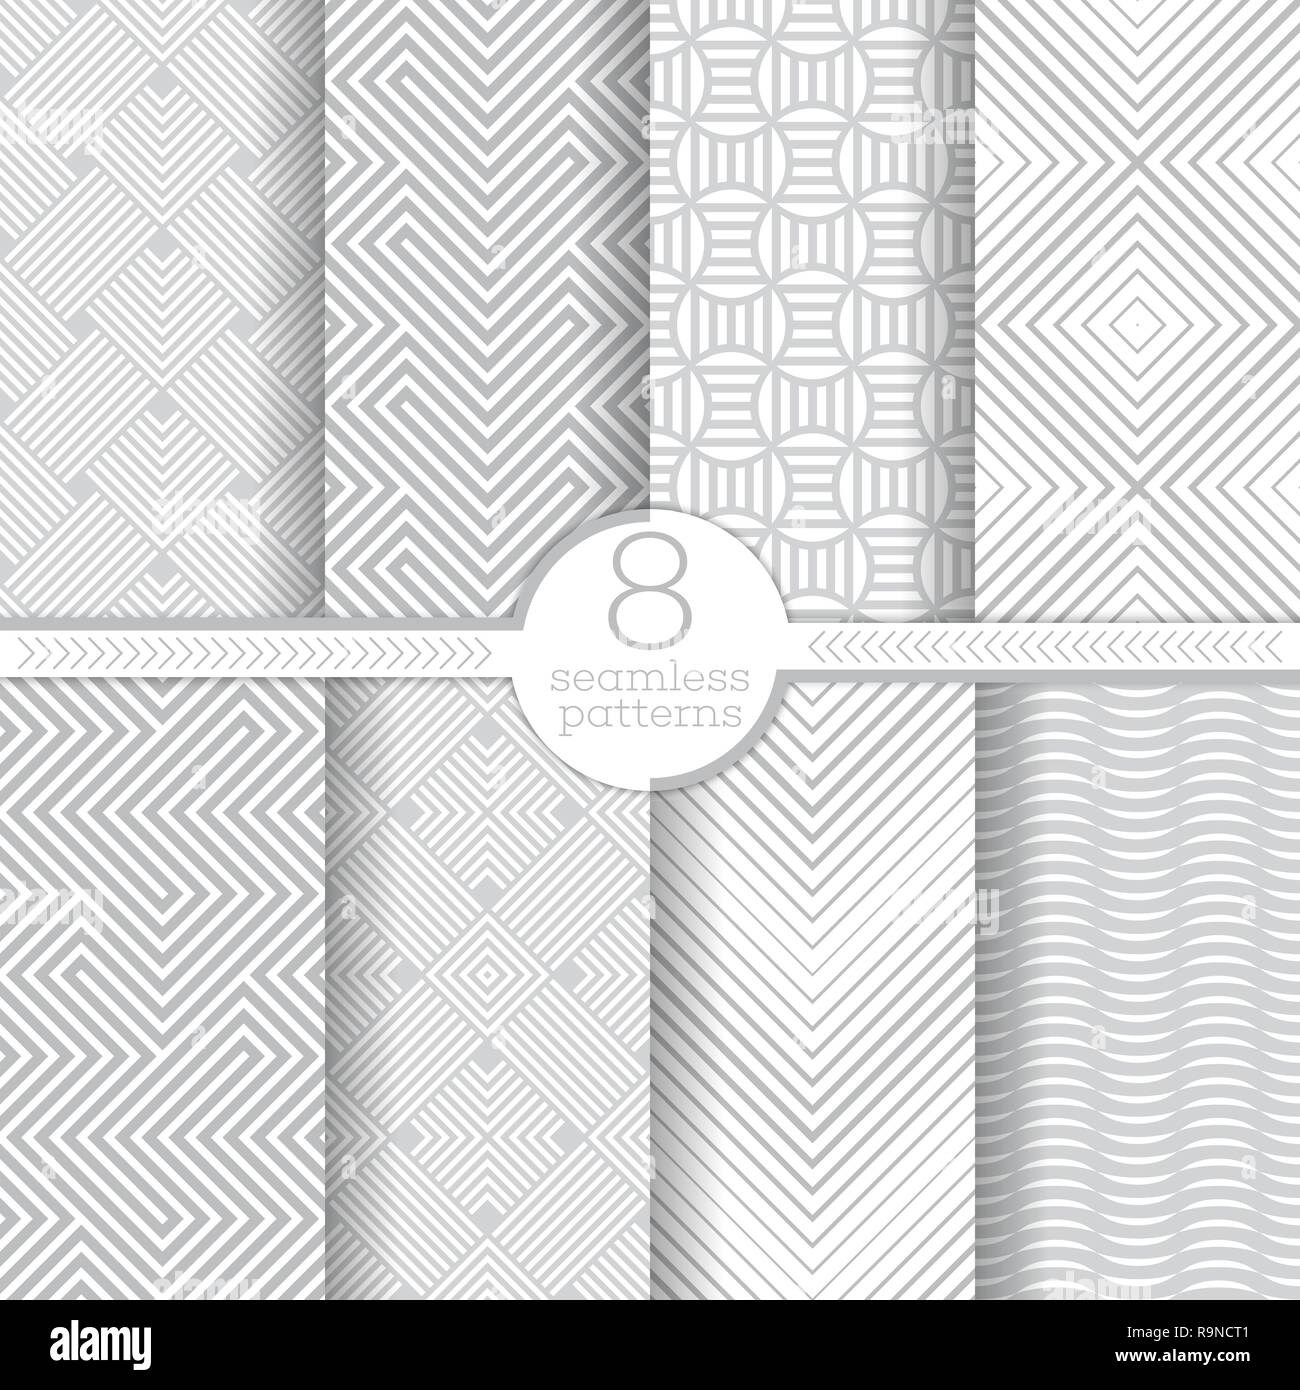 Set of vector seamless patterns. Modern stylish geometric textures. Infinitely repeating geometrical ornaments with different geometric shapes: rhombu Stock Vector